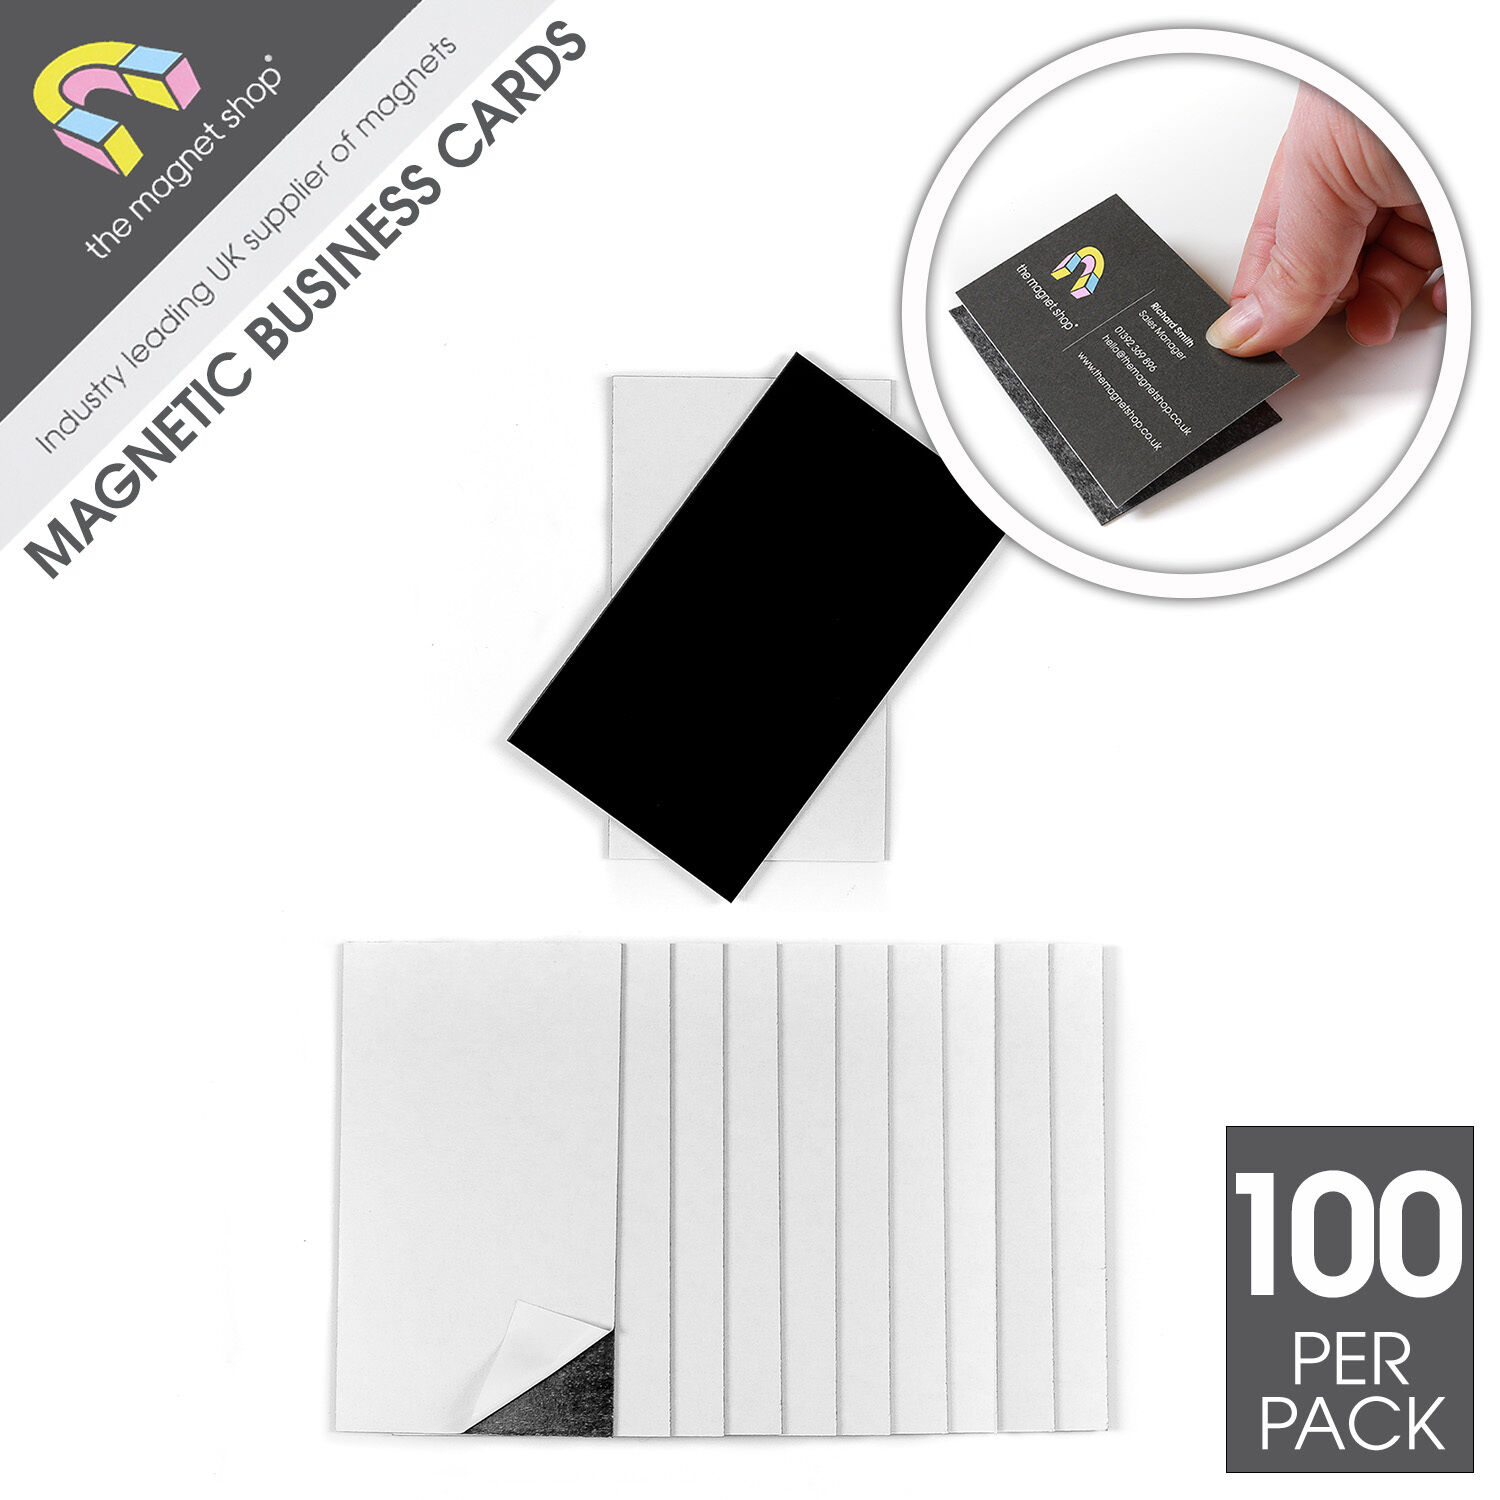 500 Self-Adhesive Peel-and-Stick Business Card Size Magnets 1 Оne Расk 